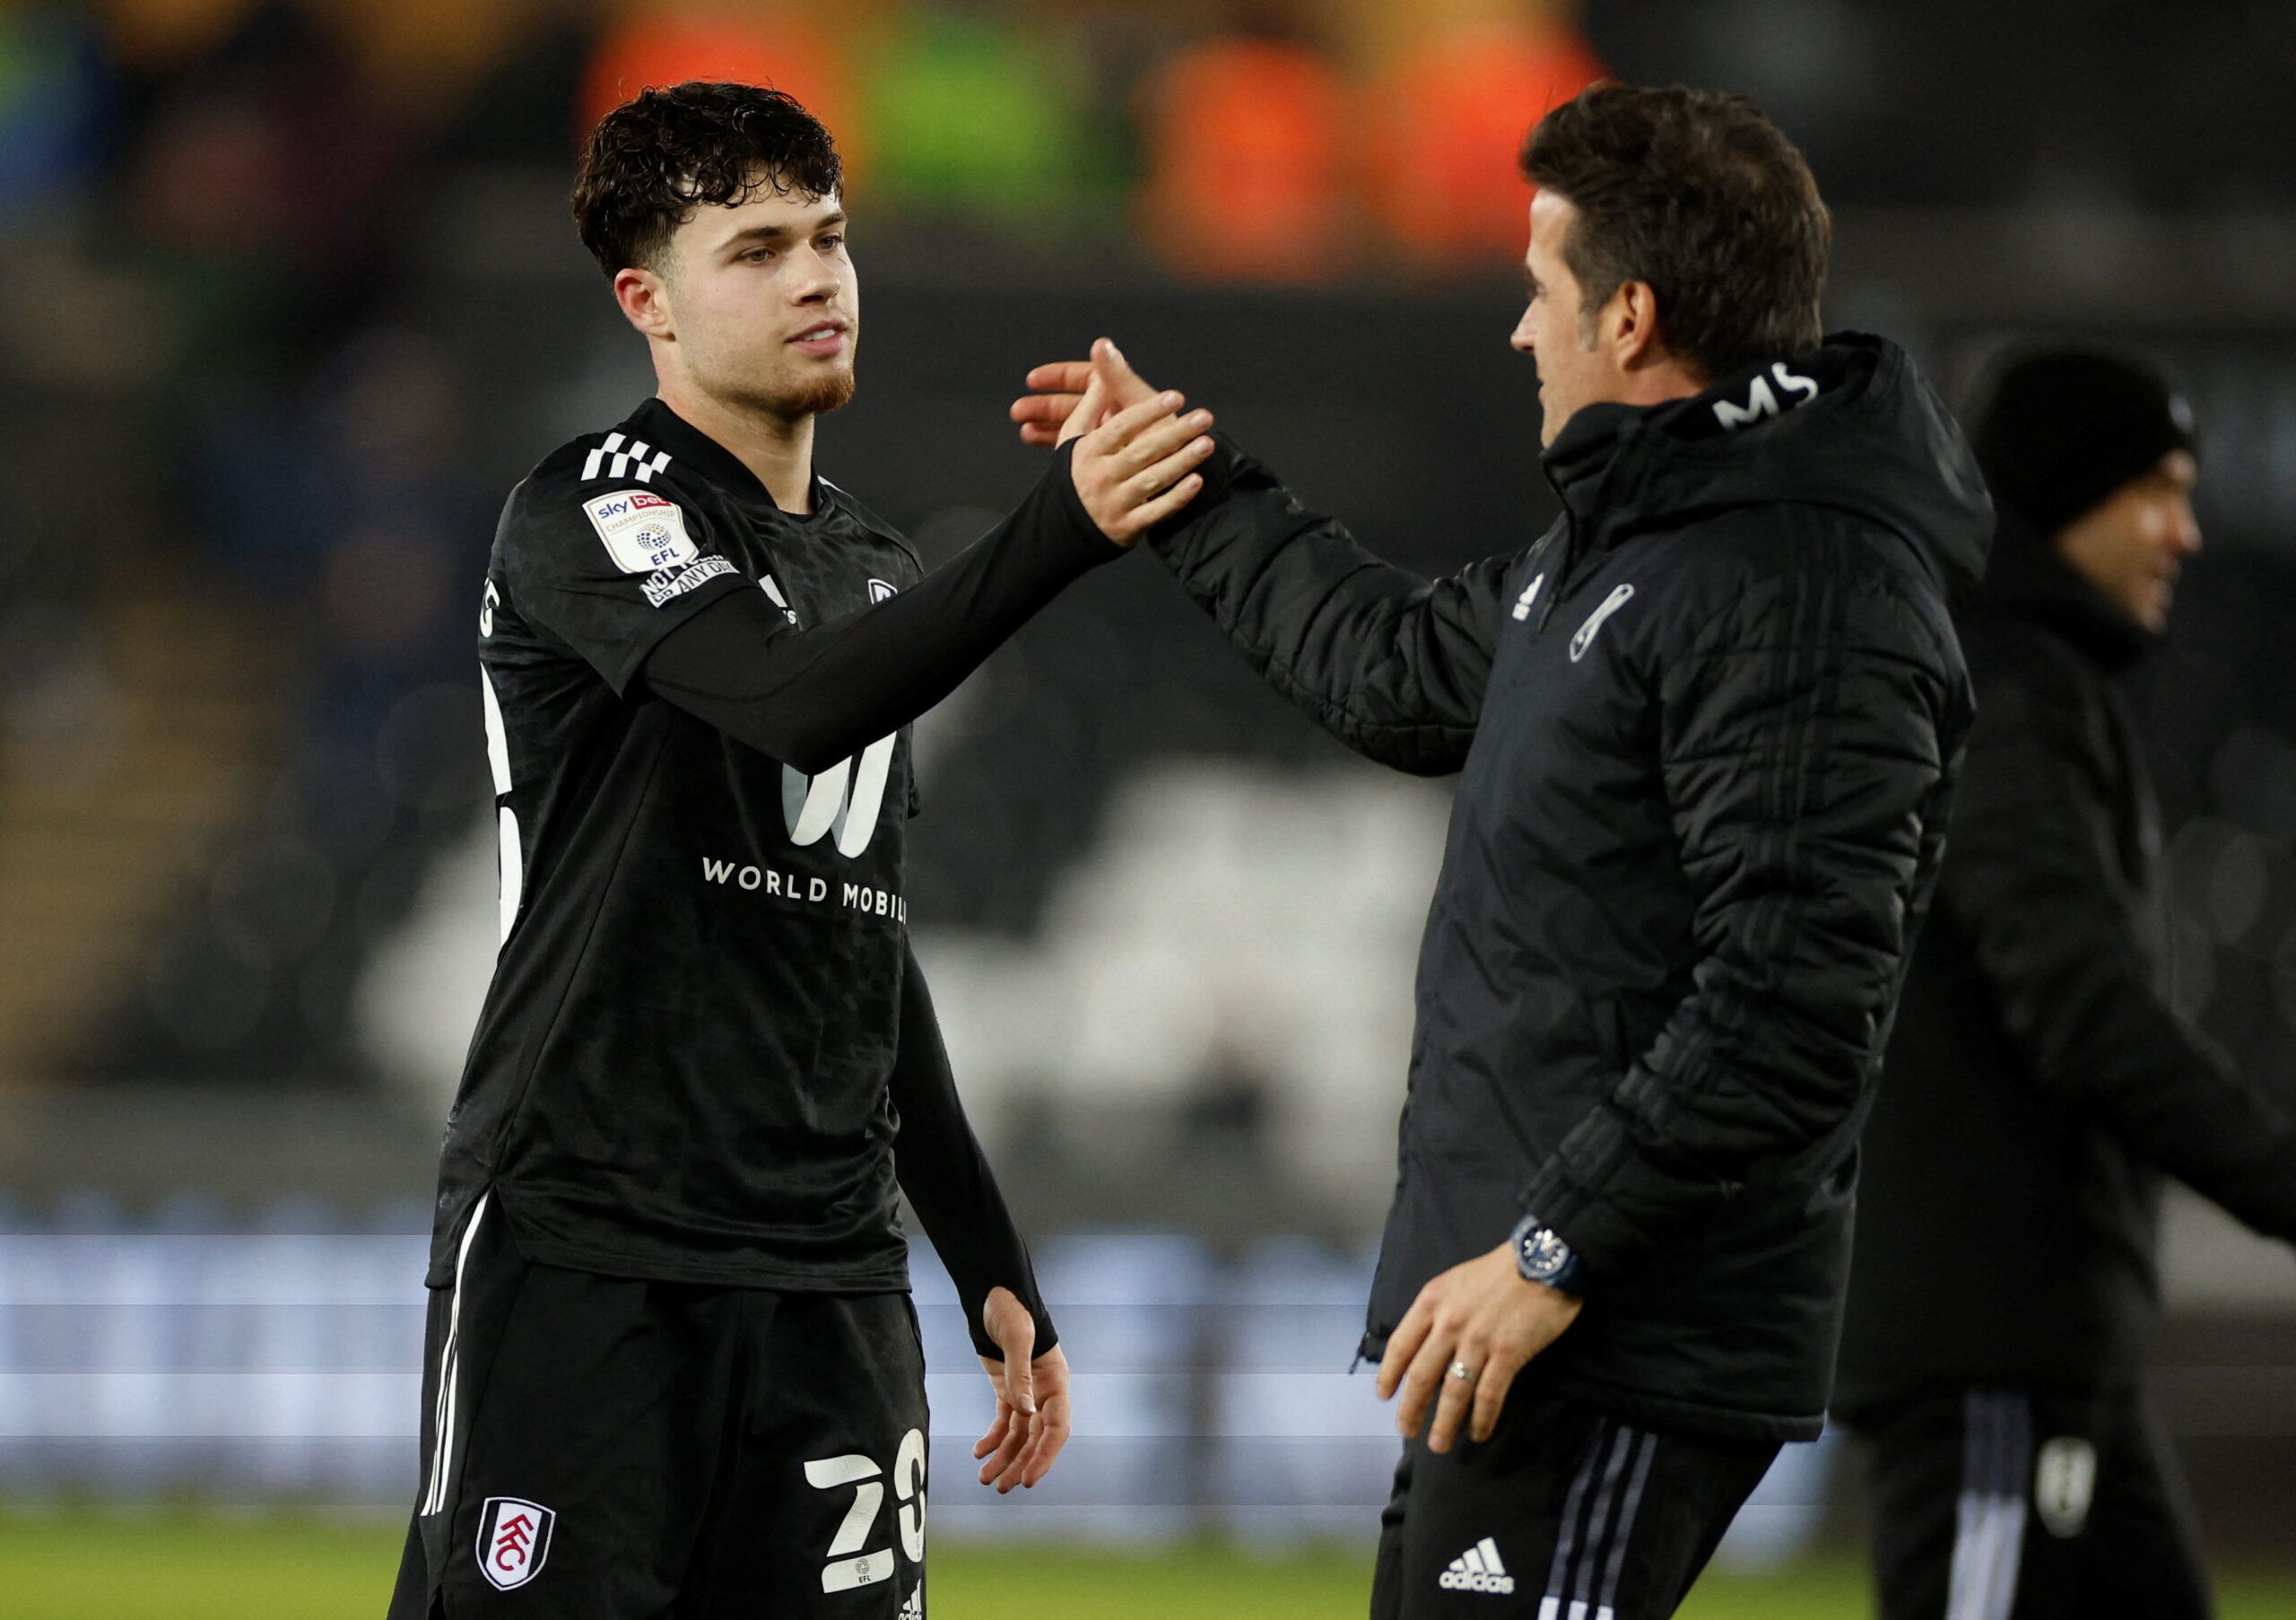 Soccer Football - Championship - Swansea City v Fulham - Swansea.com Stadium, Swansea, Britain - March 8, 2022  Fulham?s Neco Williams celebrates with manager Marco Silva after the match  Action Images/John Sibley  EDITORIAL USE ONLY. No use with unauthorized audio, video, data, fixture lists, club/league logos or 